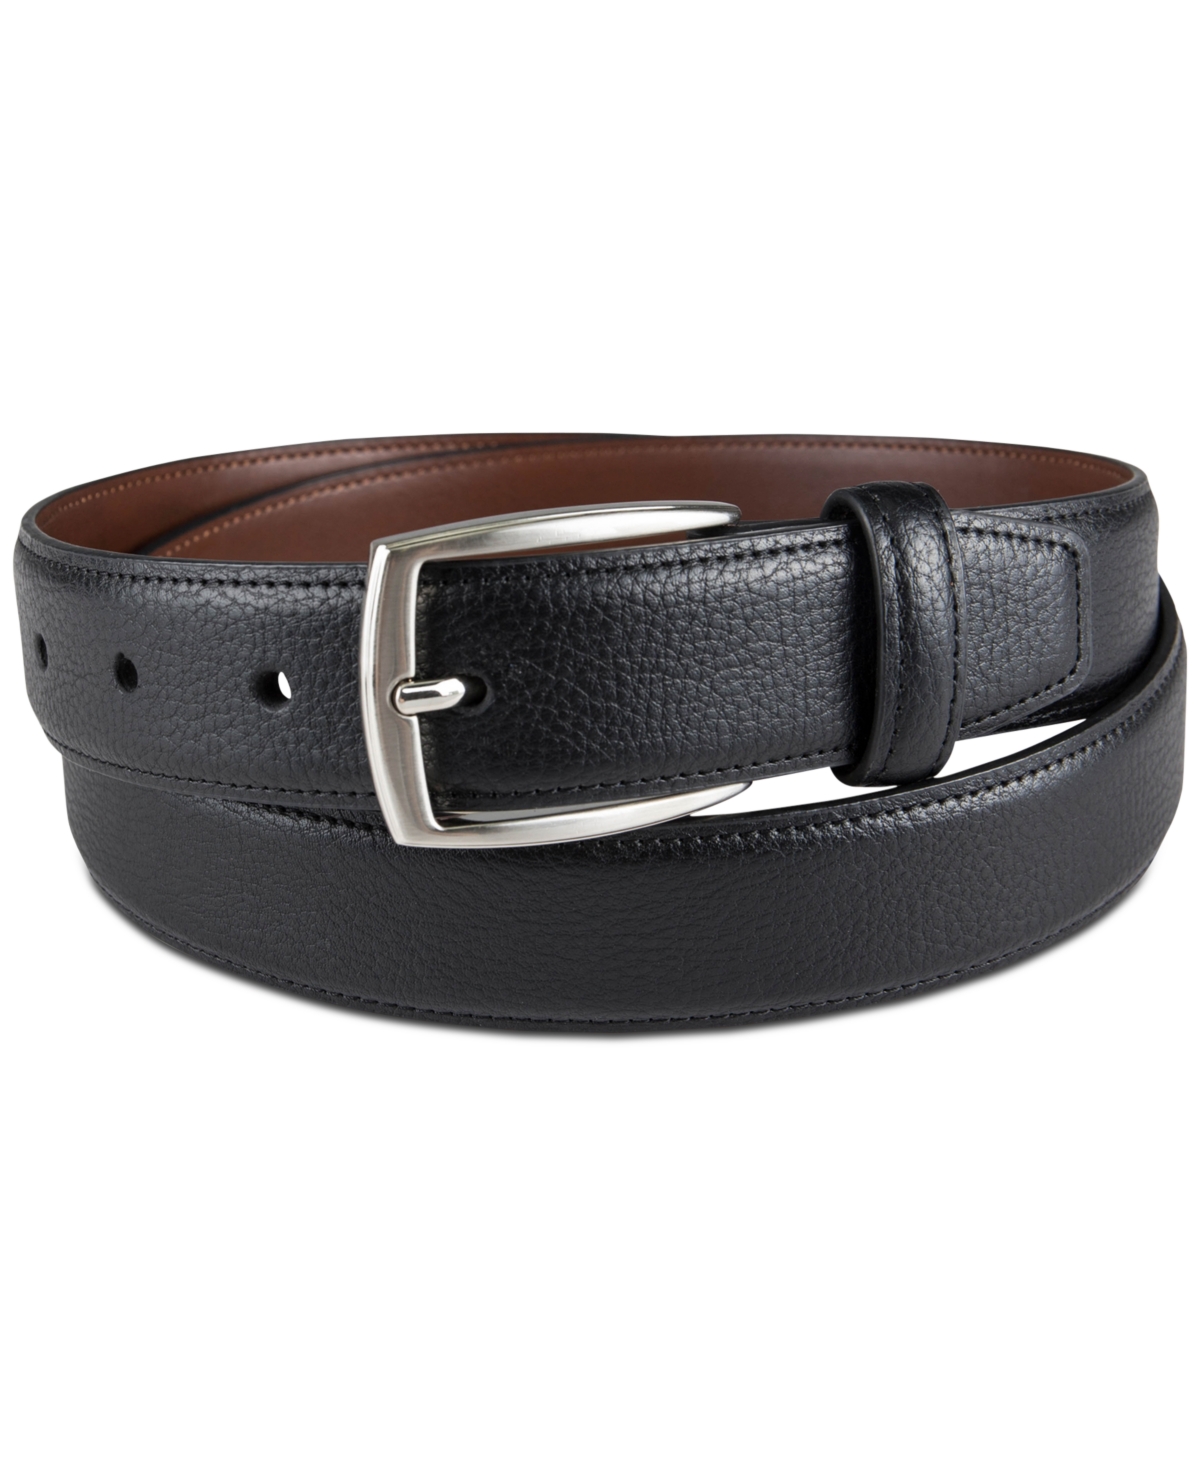 Men's Faux Leather Pebble Grain Stretch Belt, Created for Macy's - Tan